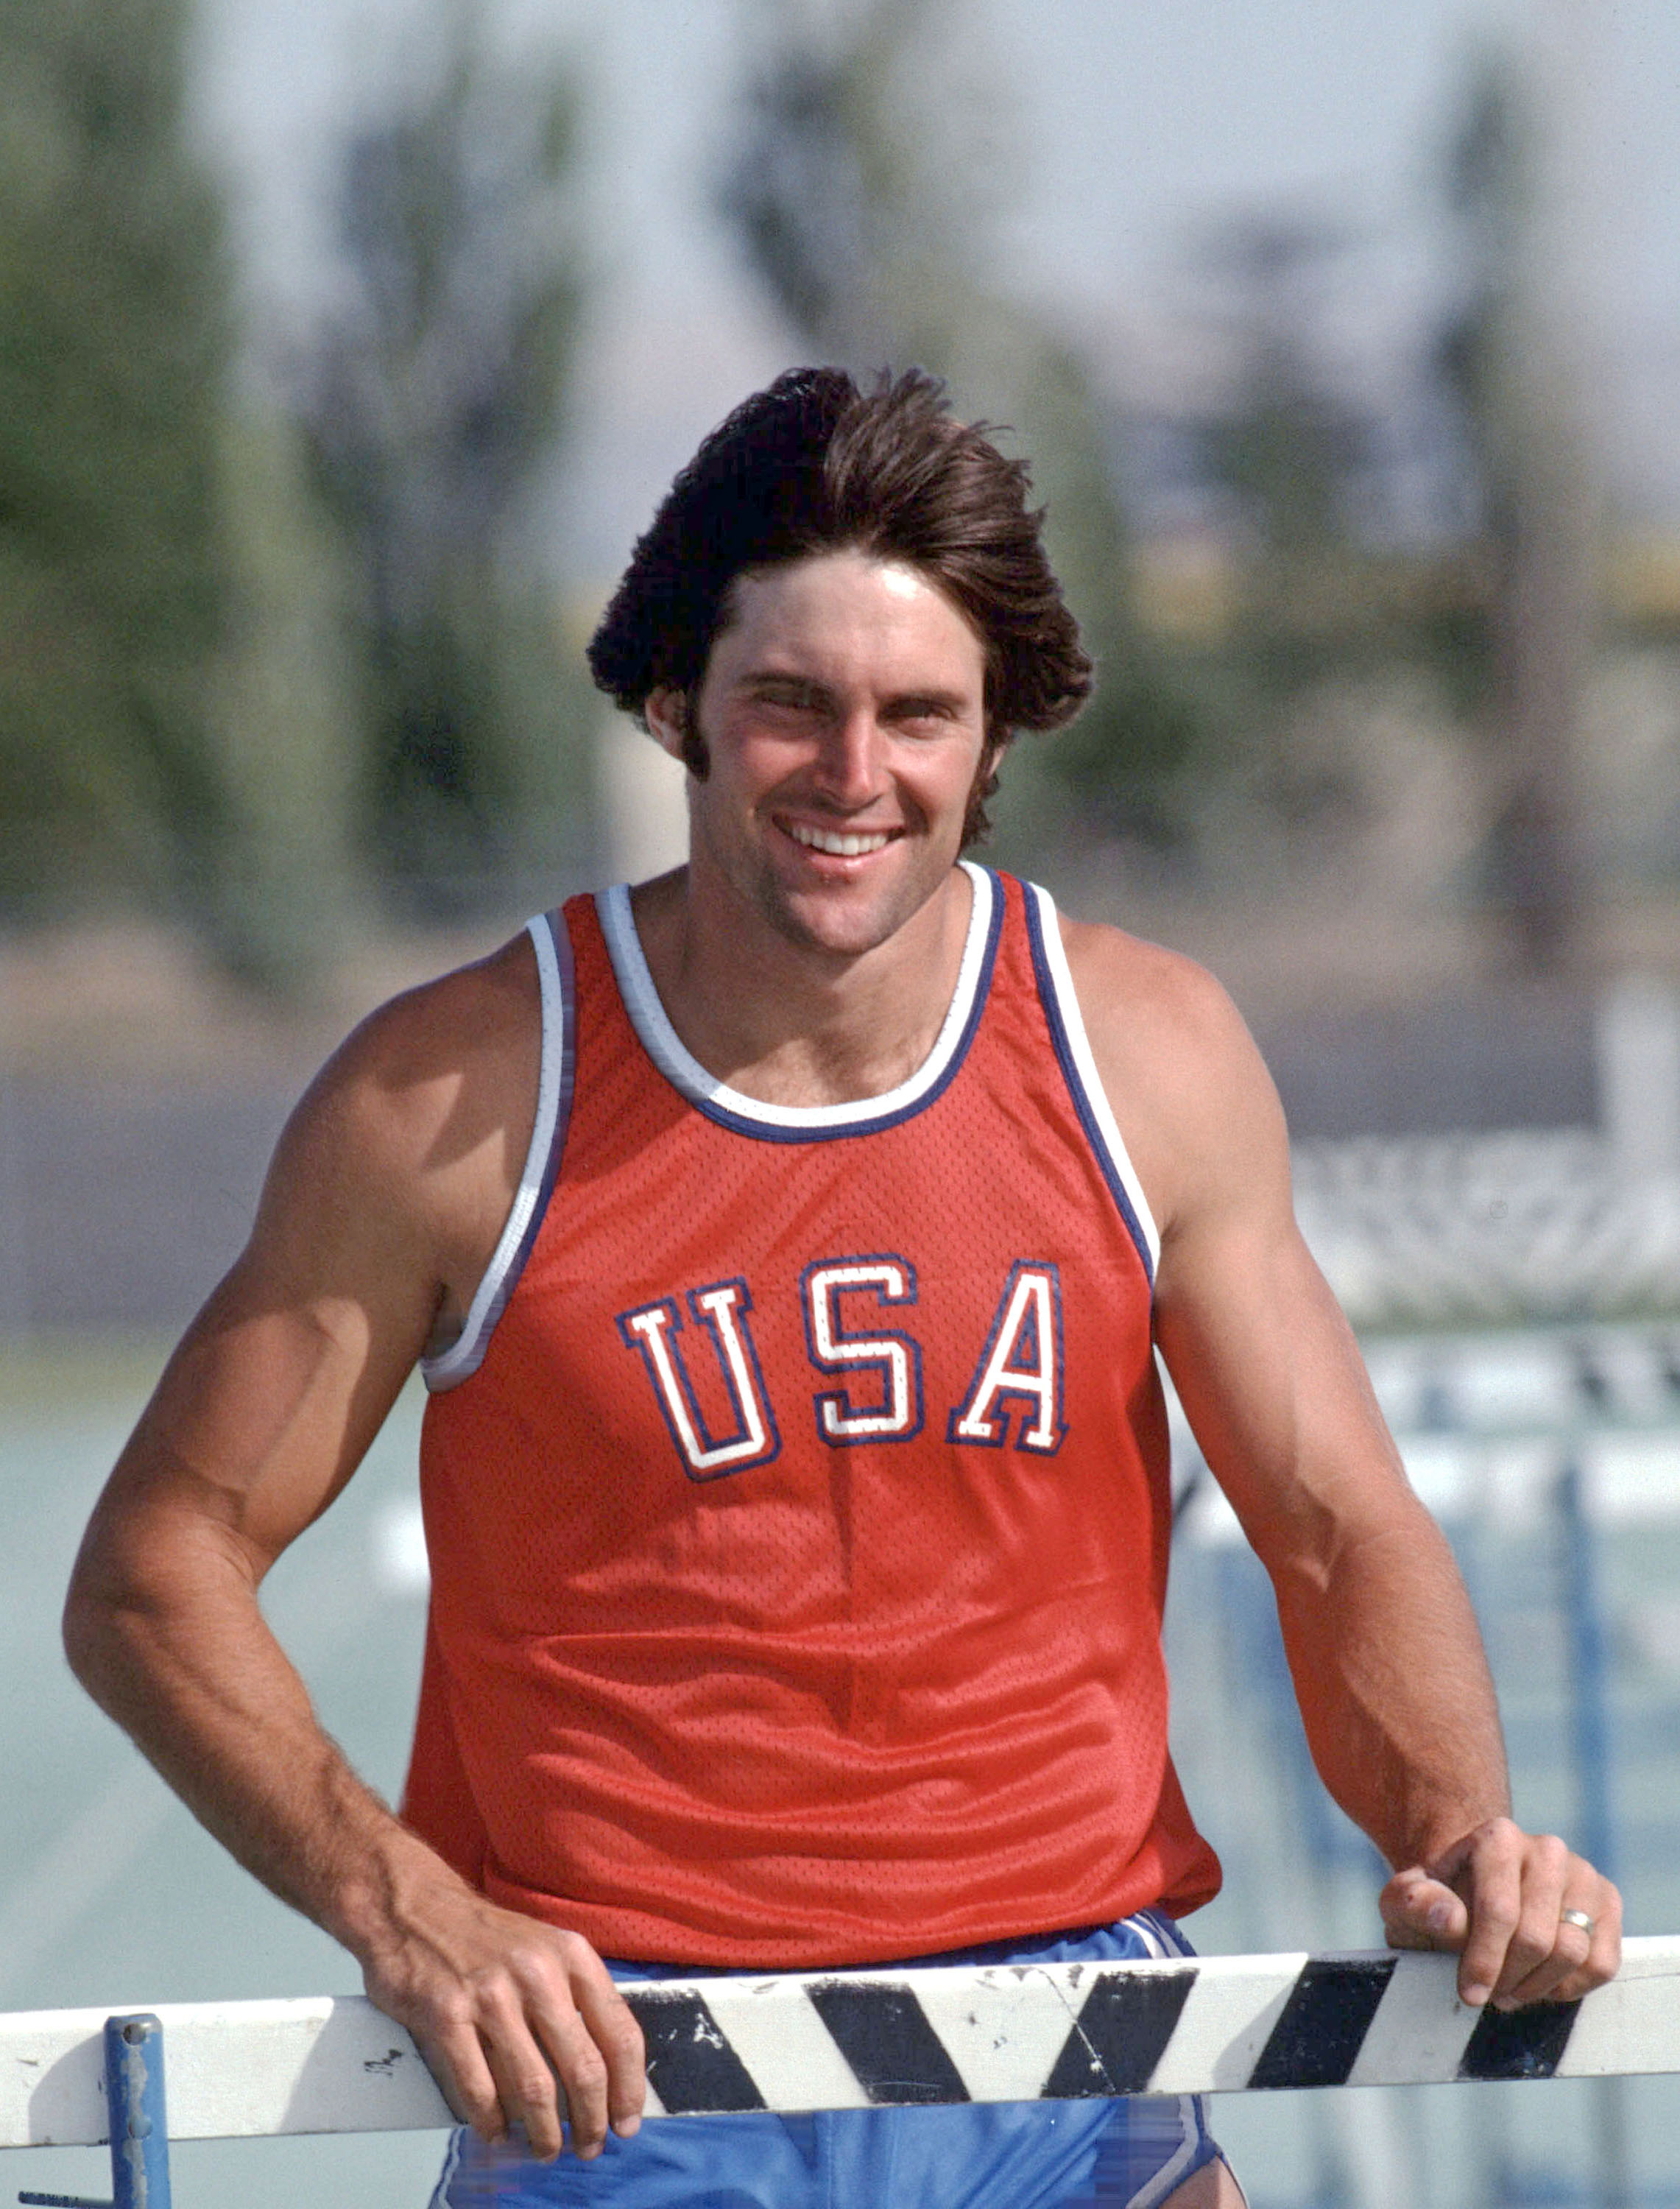 Bruce Jenner trains for the decathlon for the 1976 Summer Olympics in 1976 | Source: Getty Images